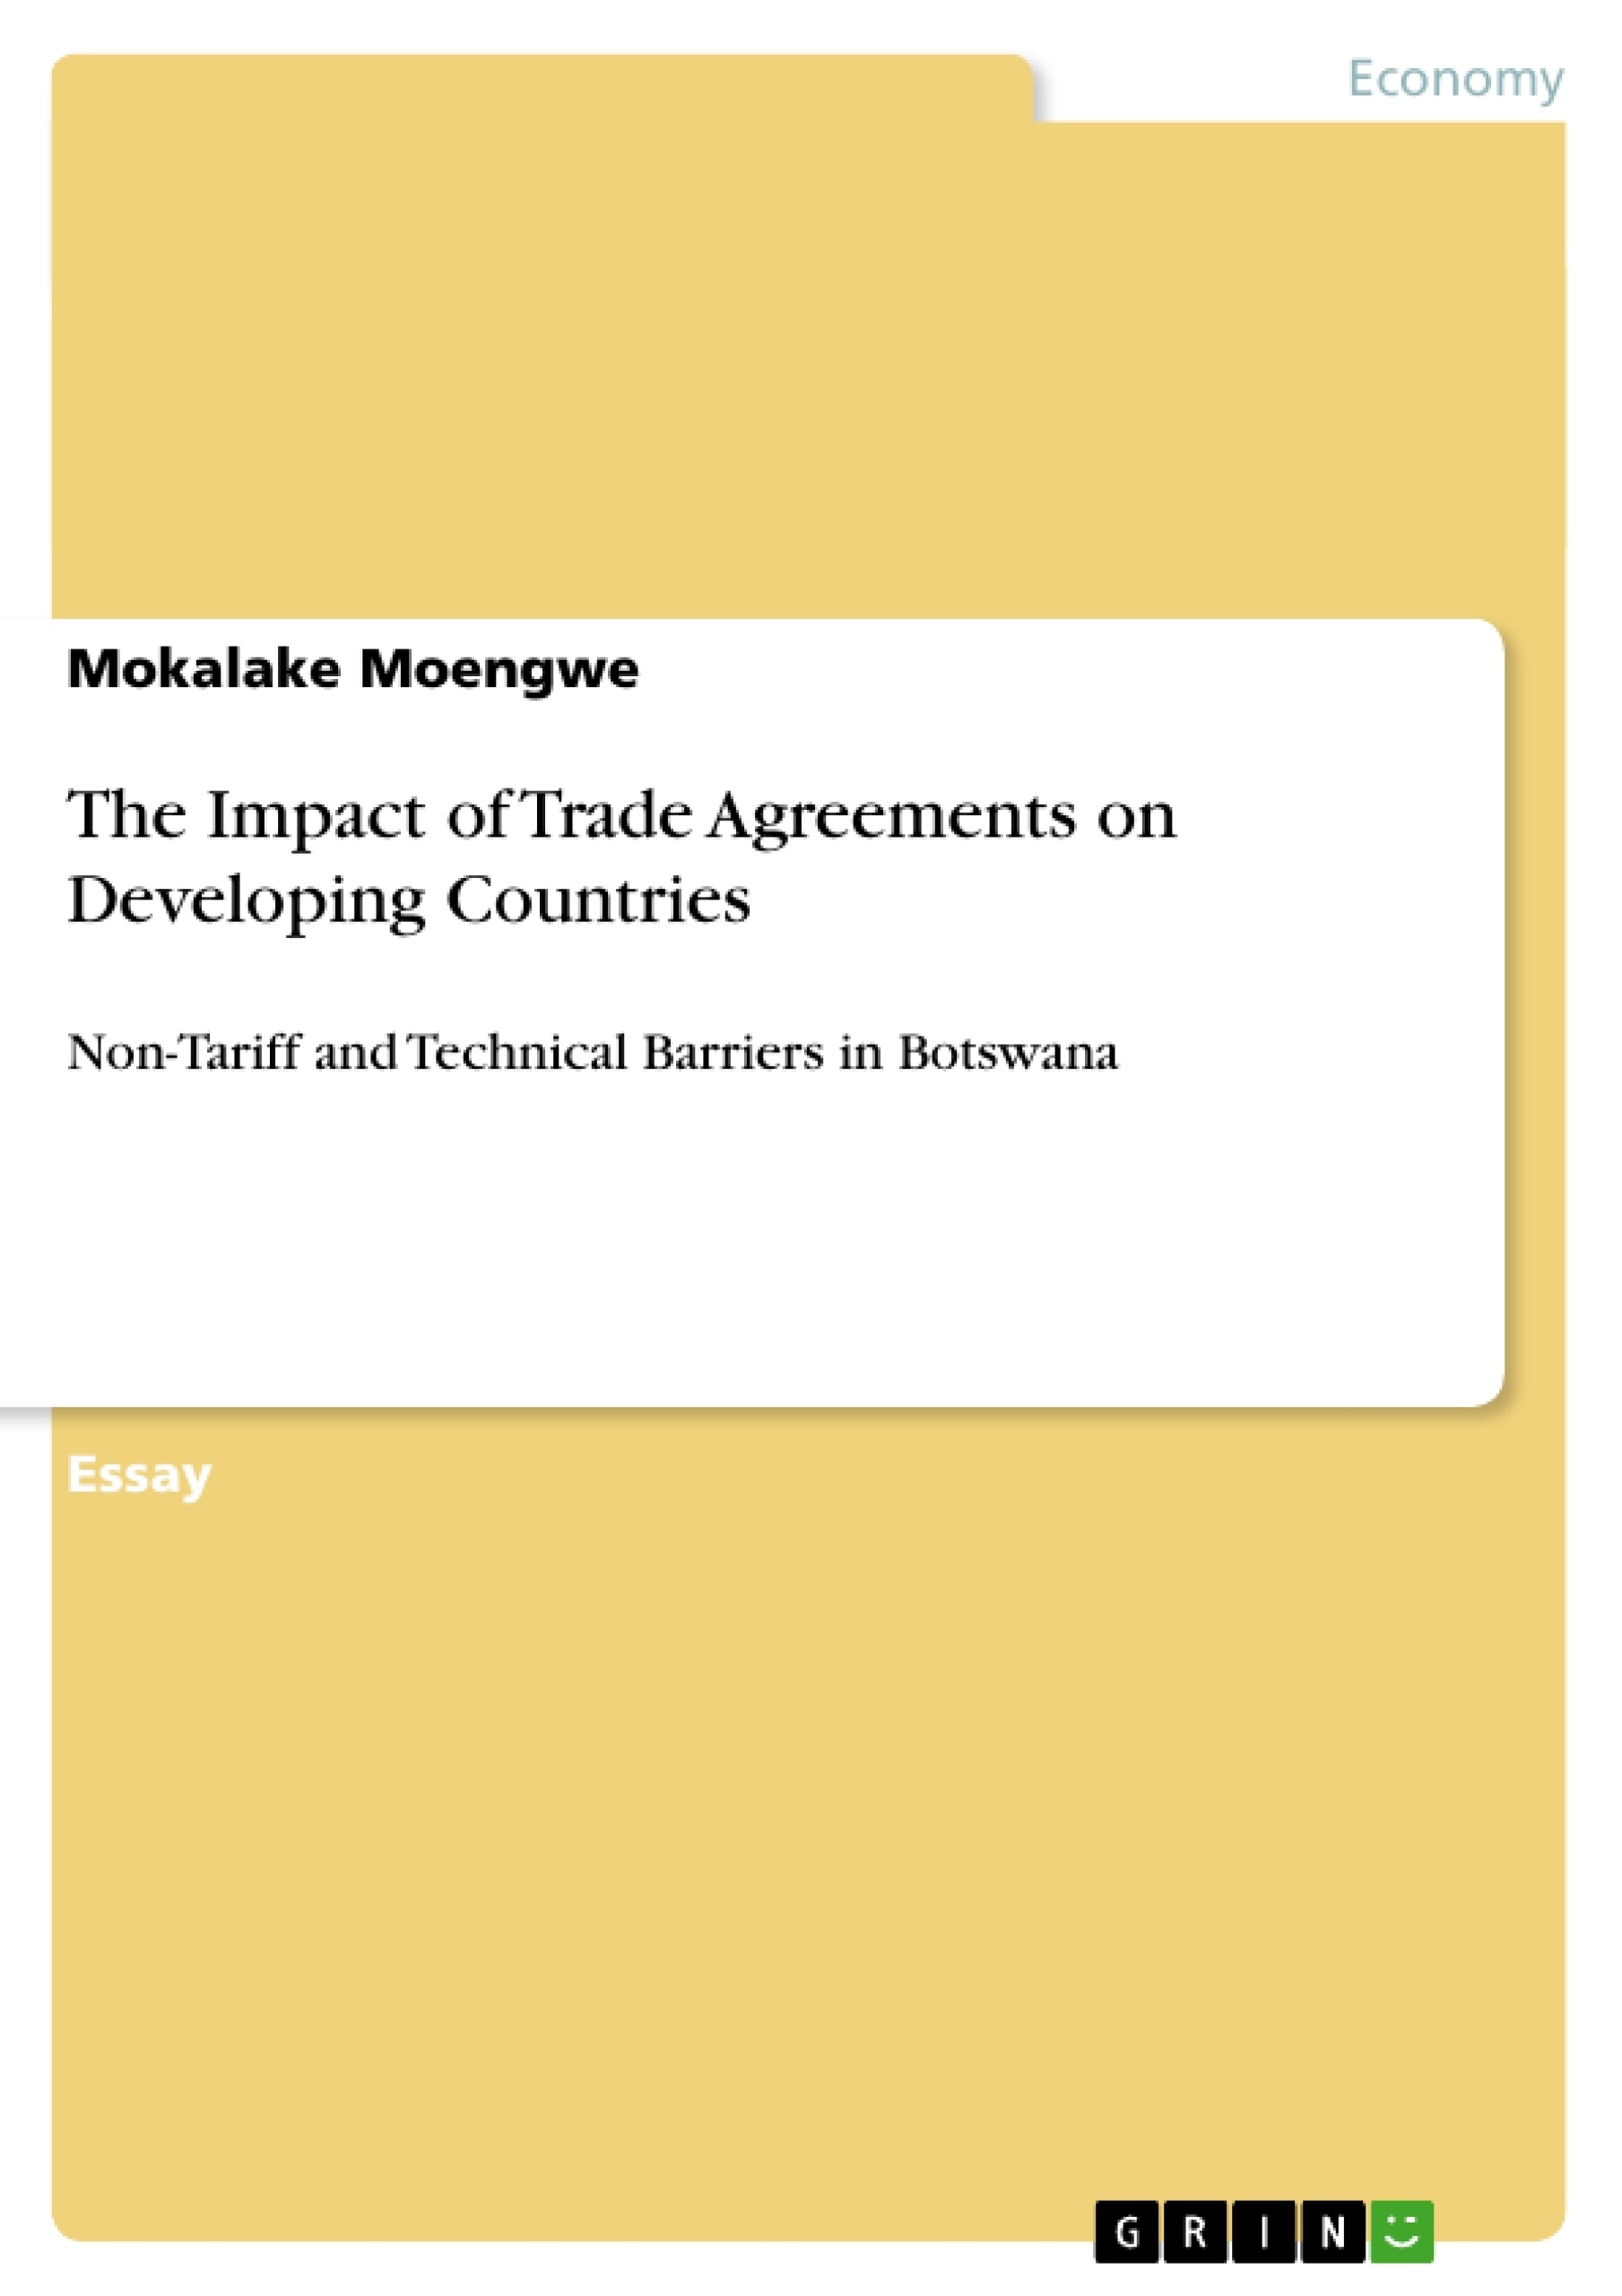 Title: The Impact of Trade Agreements on Developing Countries